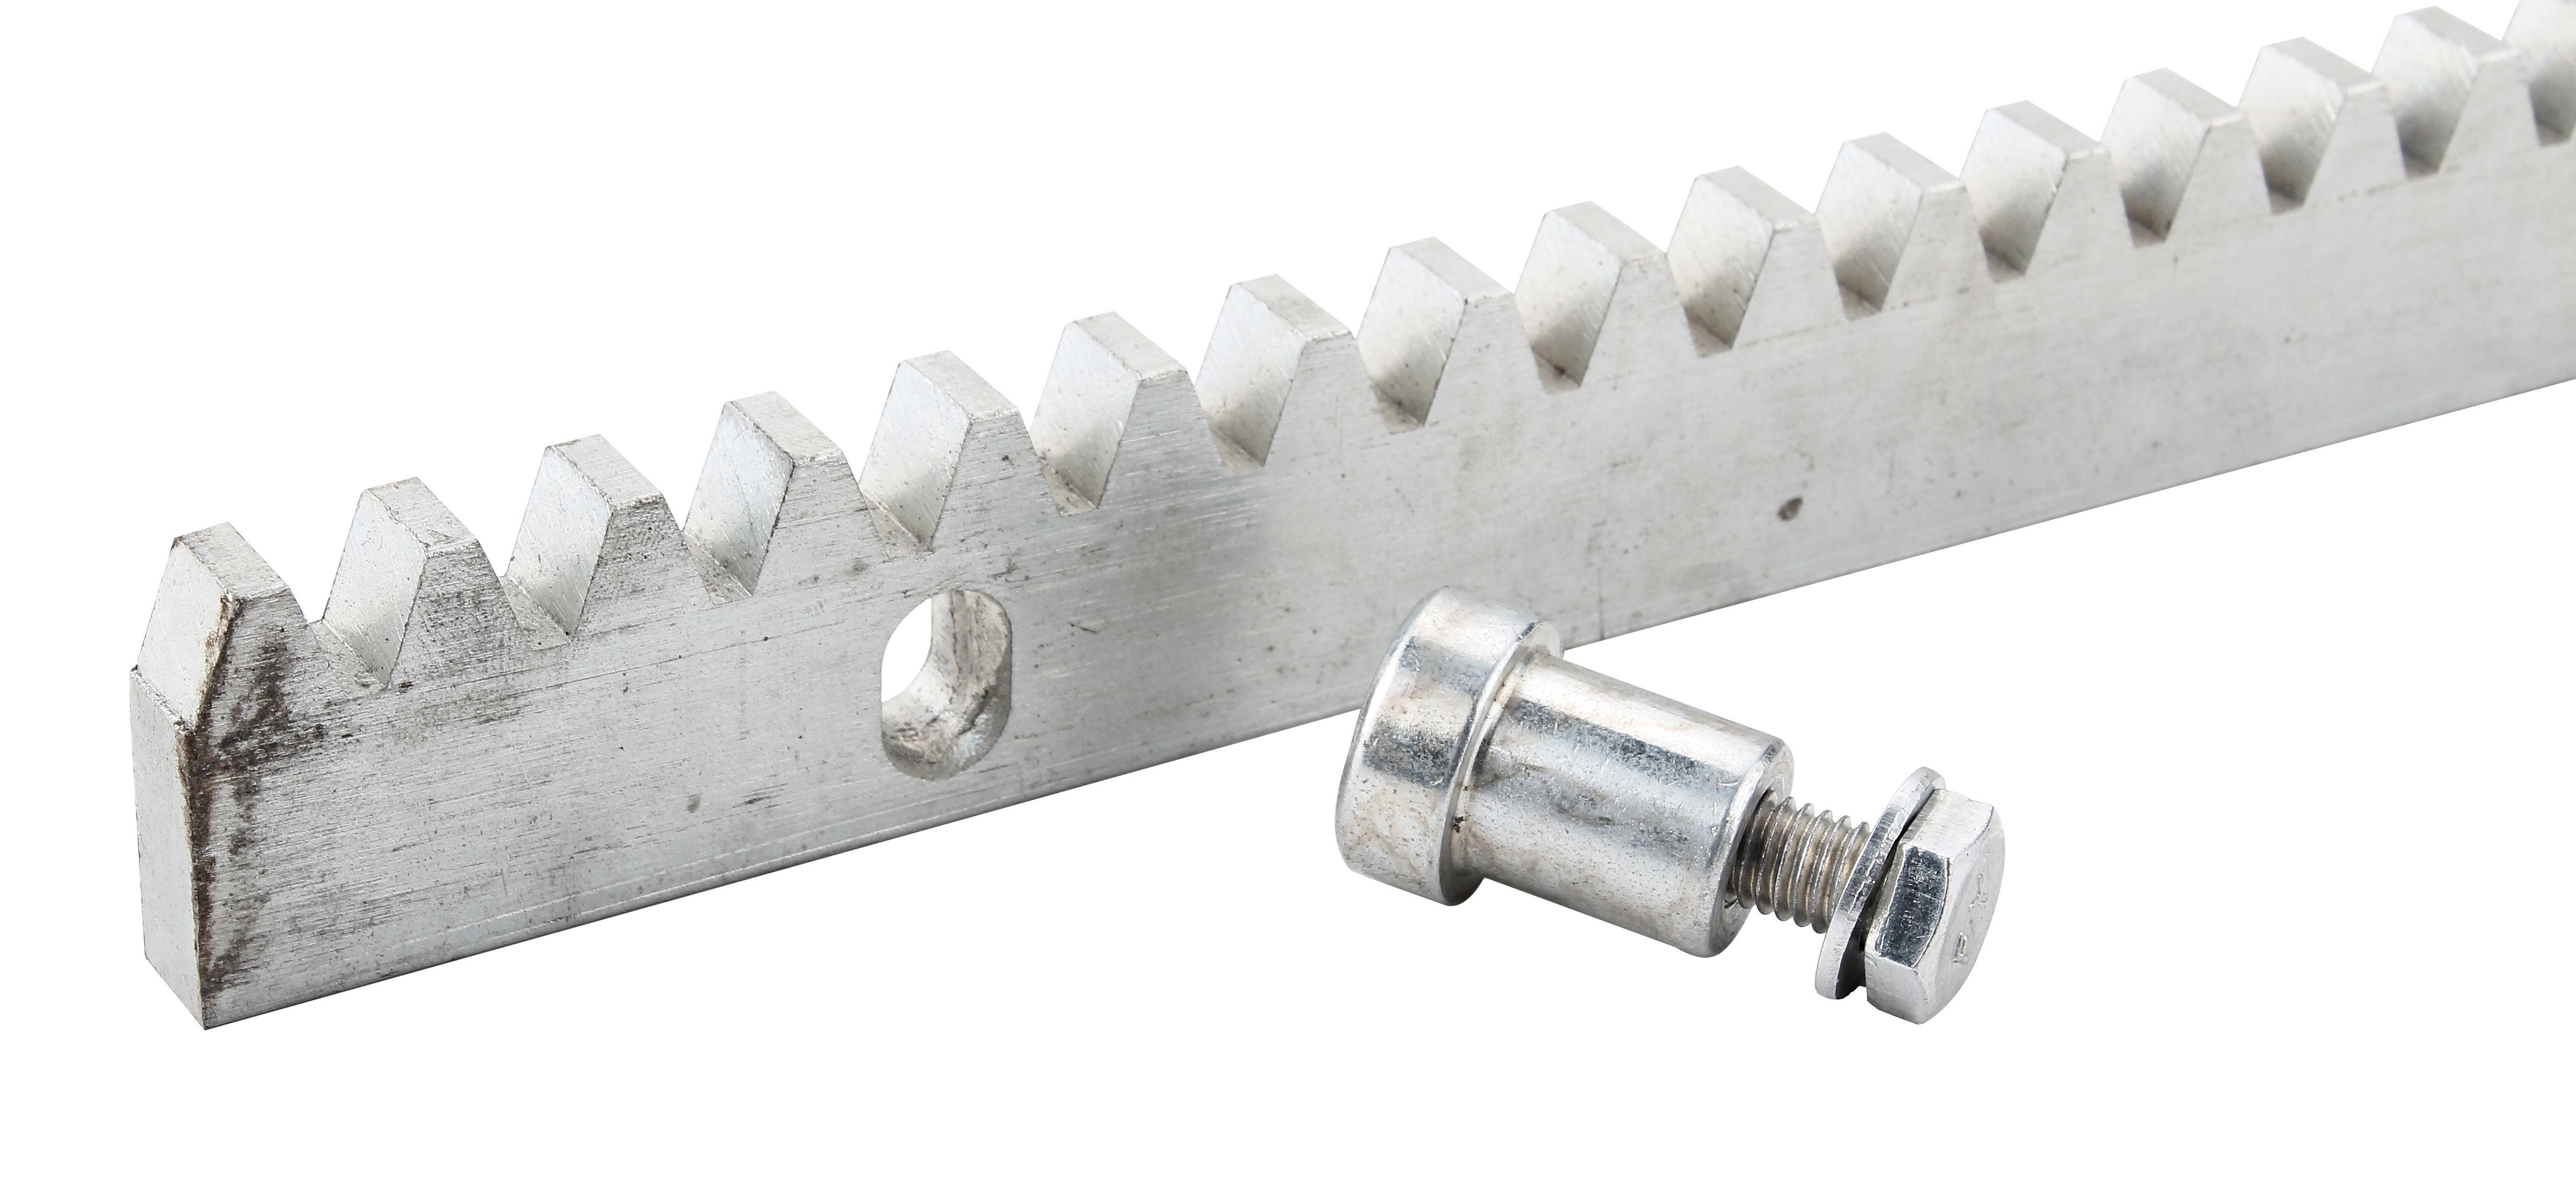  Zinc Plated Sliding Gate Gear Rack With Bolts M4 M6 Steel Or Nylon Manufactures